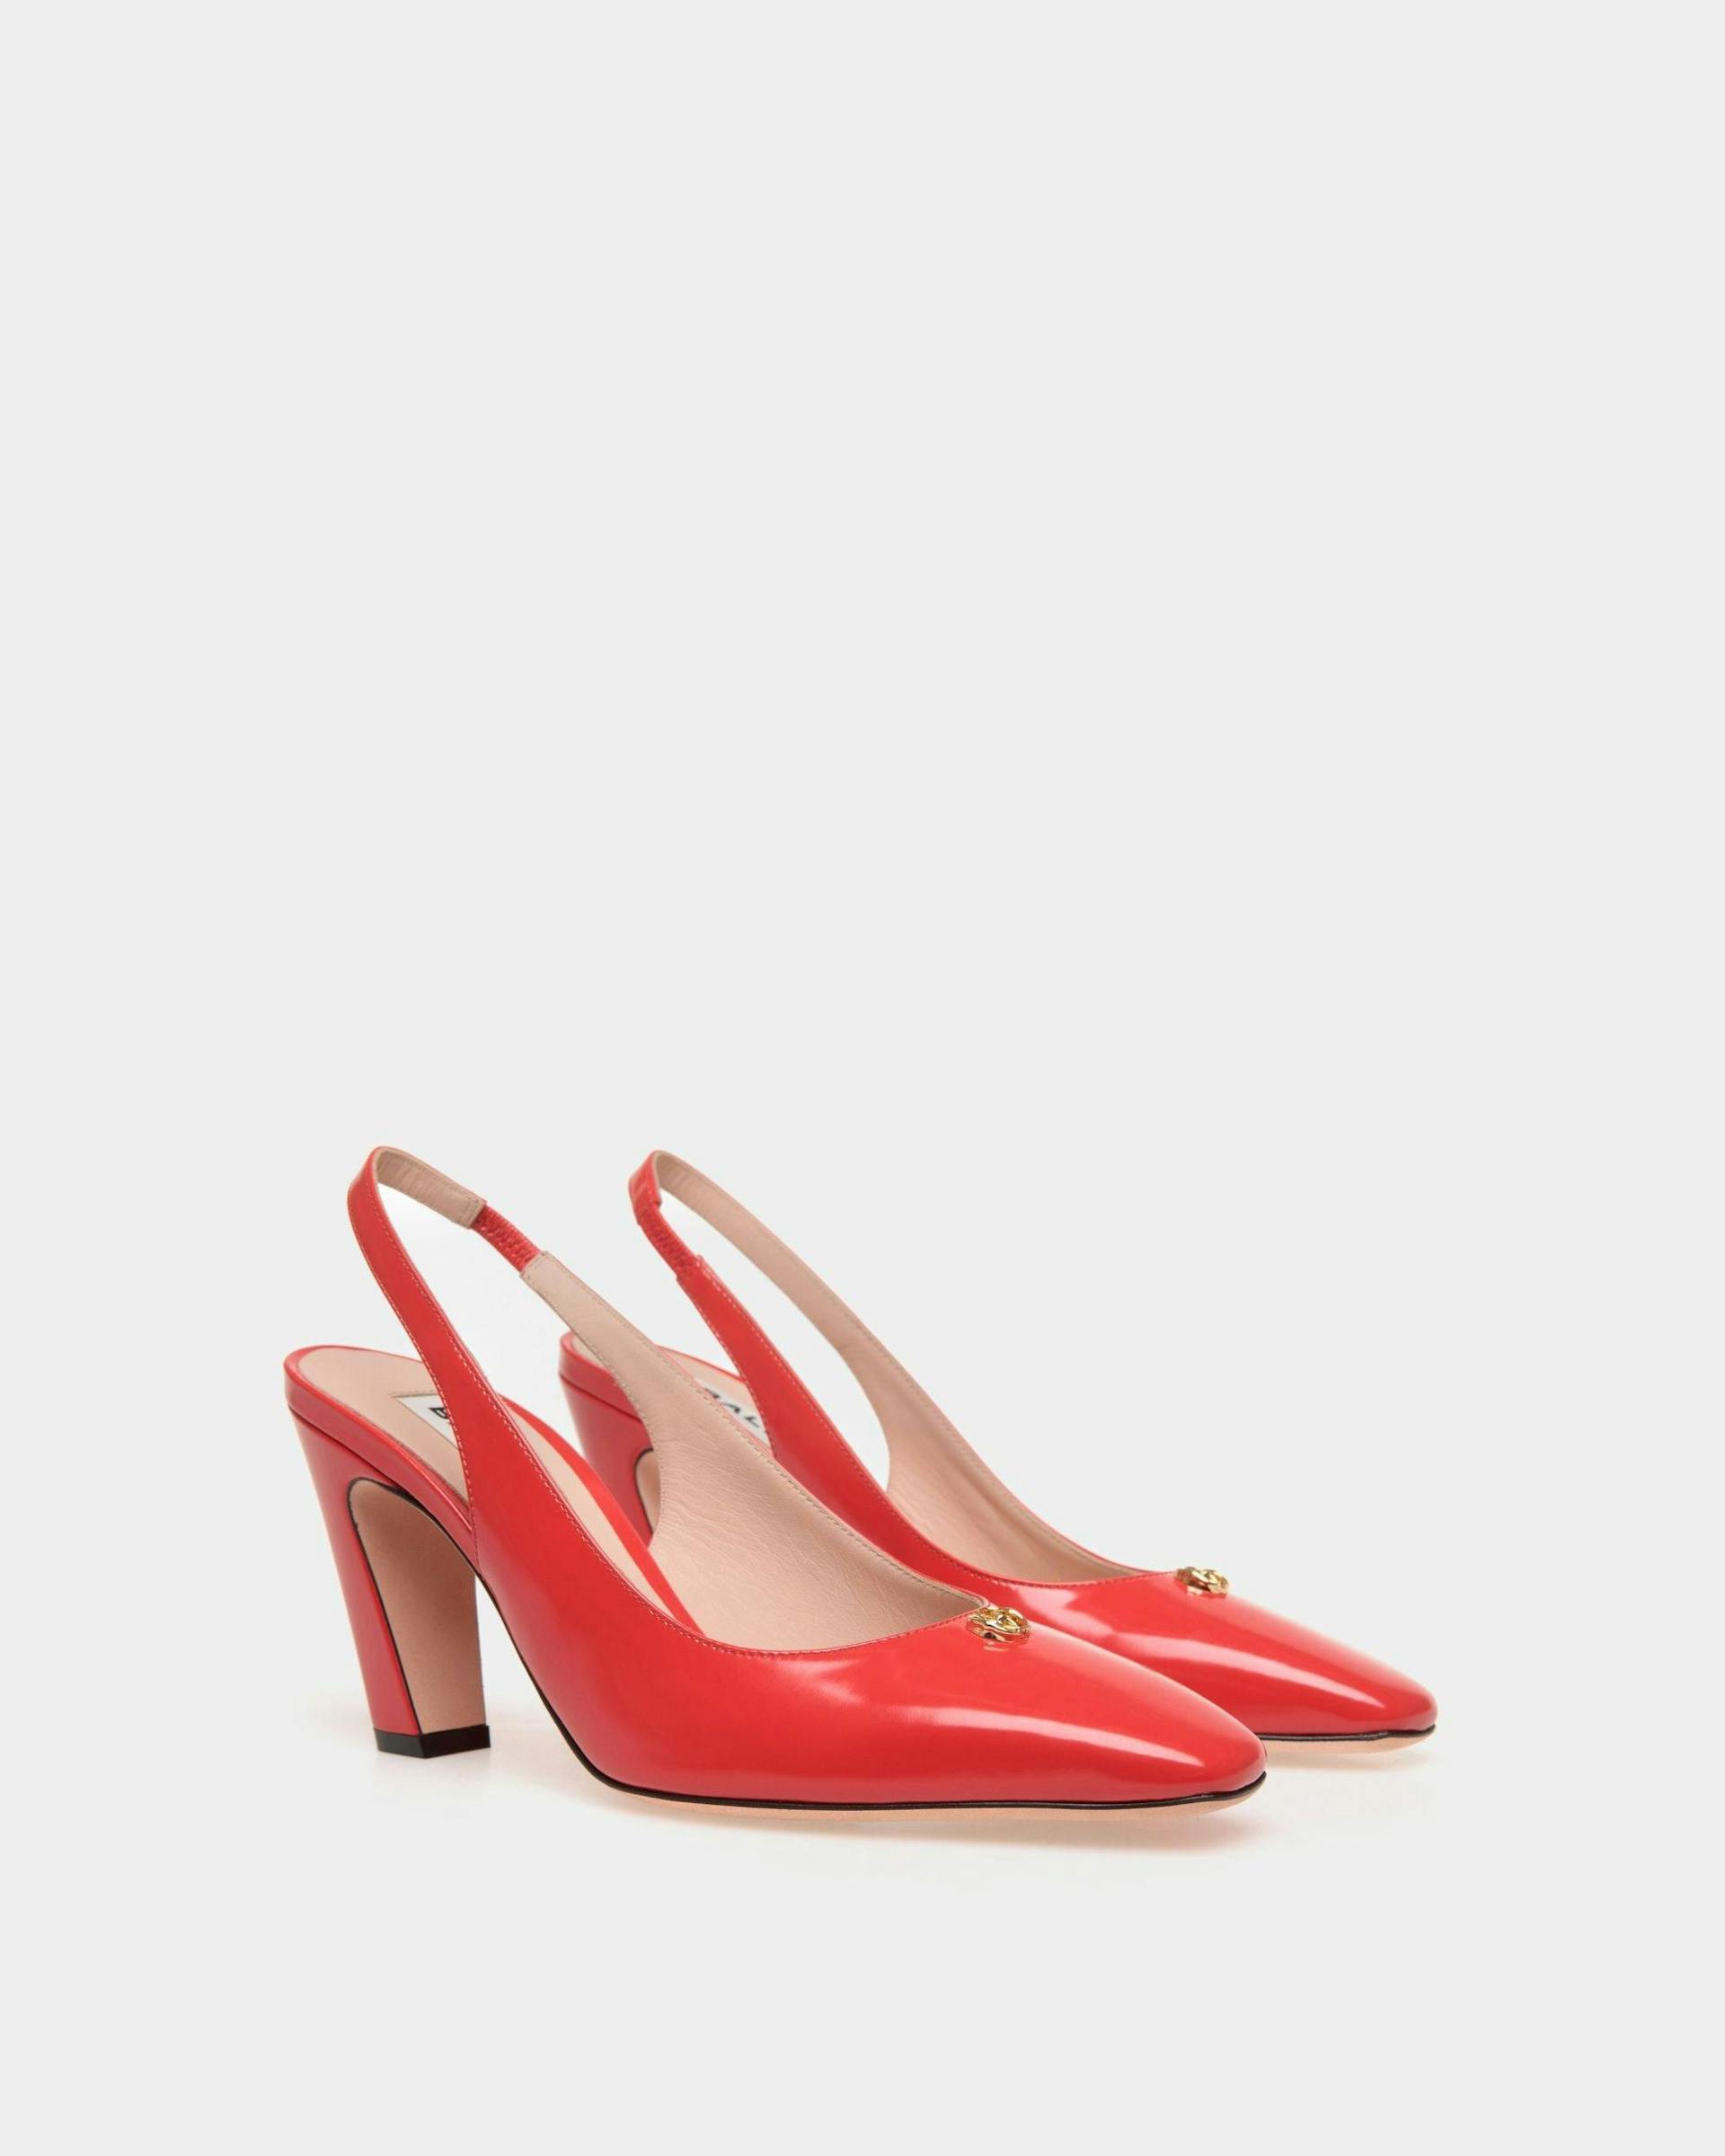 Women's Sylt Slingback Pump In Red Leather | Bally | Still Life 3/4 Front